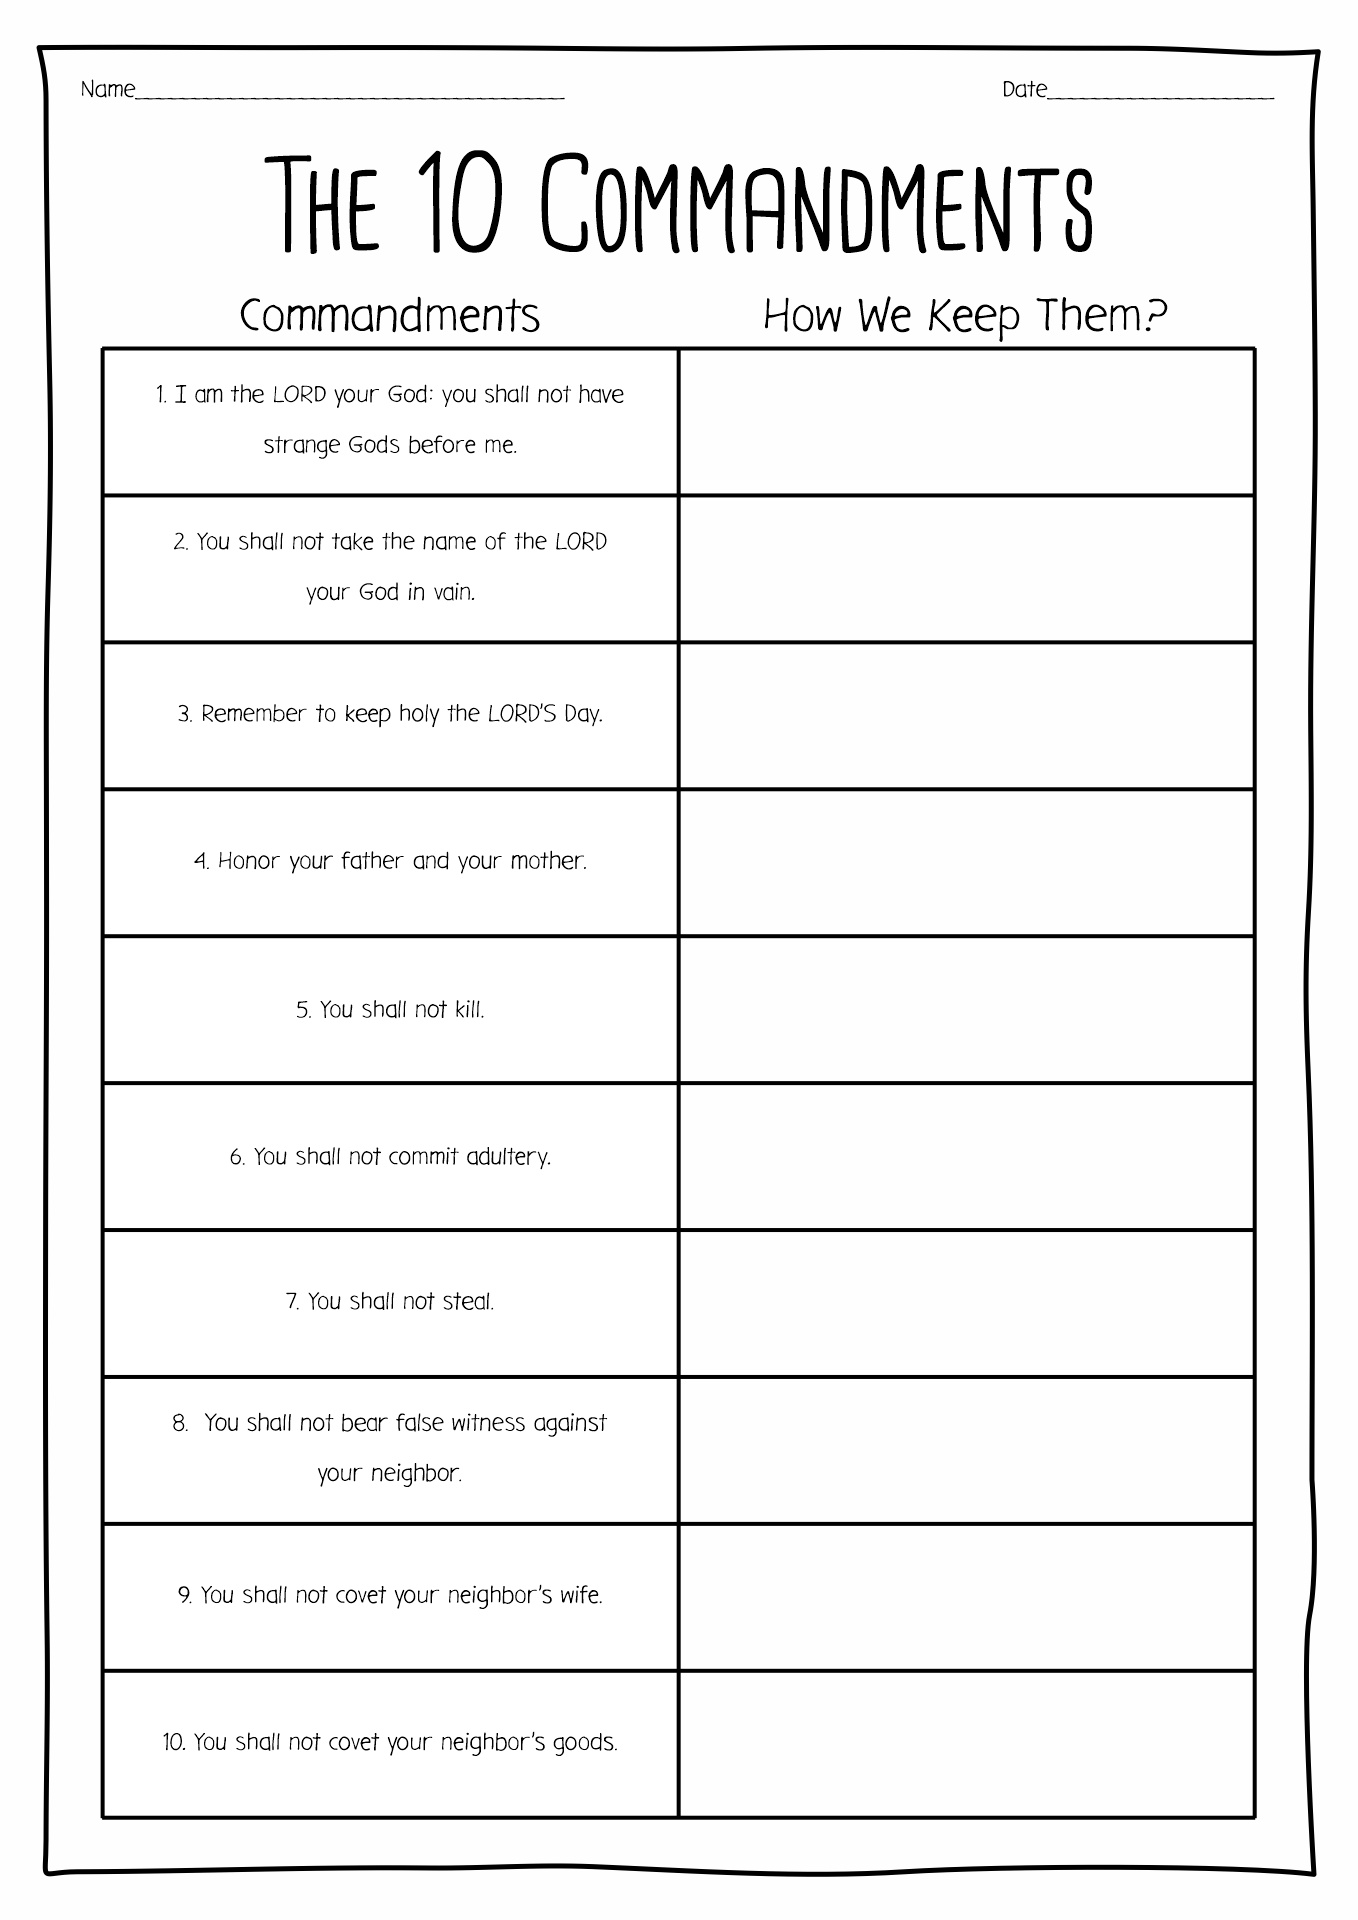 14-best-images-of-free-printable-10-commandments-worksheets-free-printable-ten-commandments